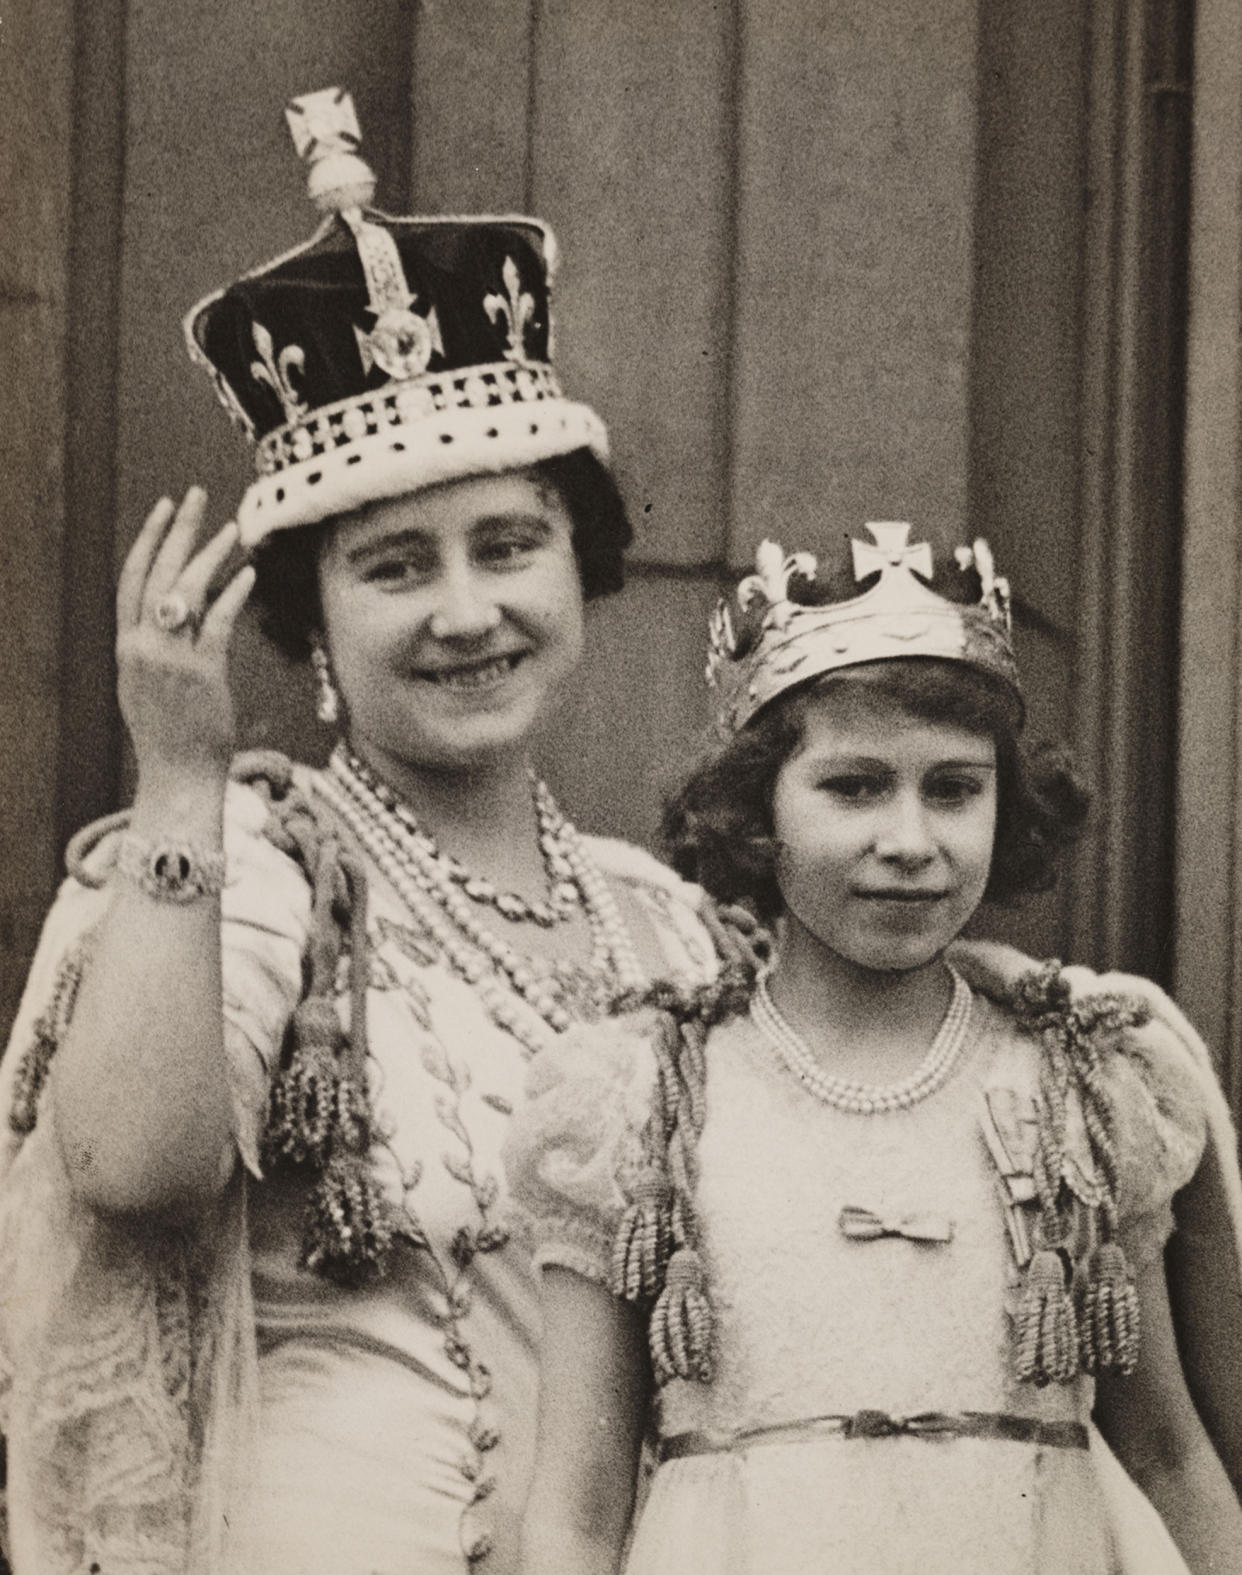 The Queen and Princess Elizabeth after the Coronation of George VI, 1937 (Daily Herald Archive / SSPL via Getty Images)